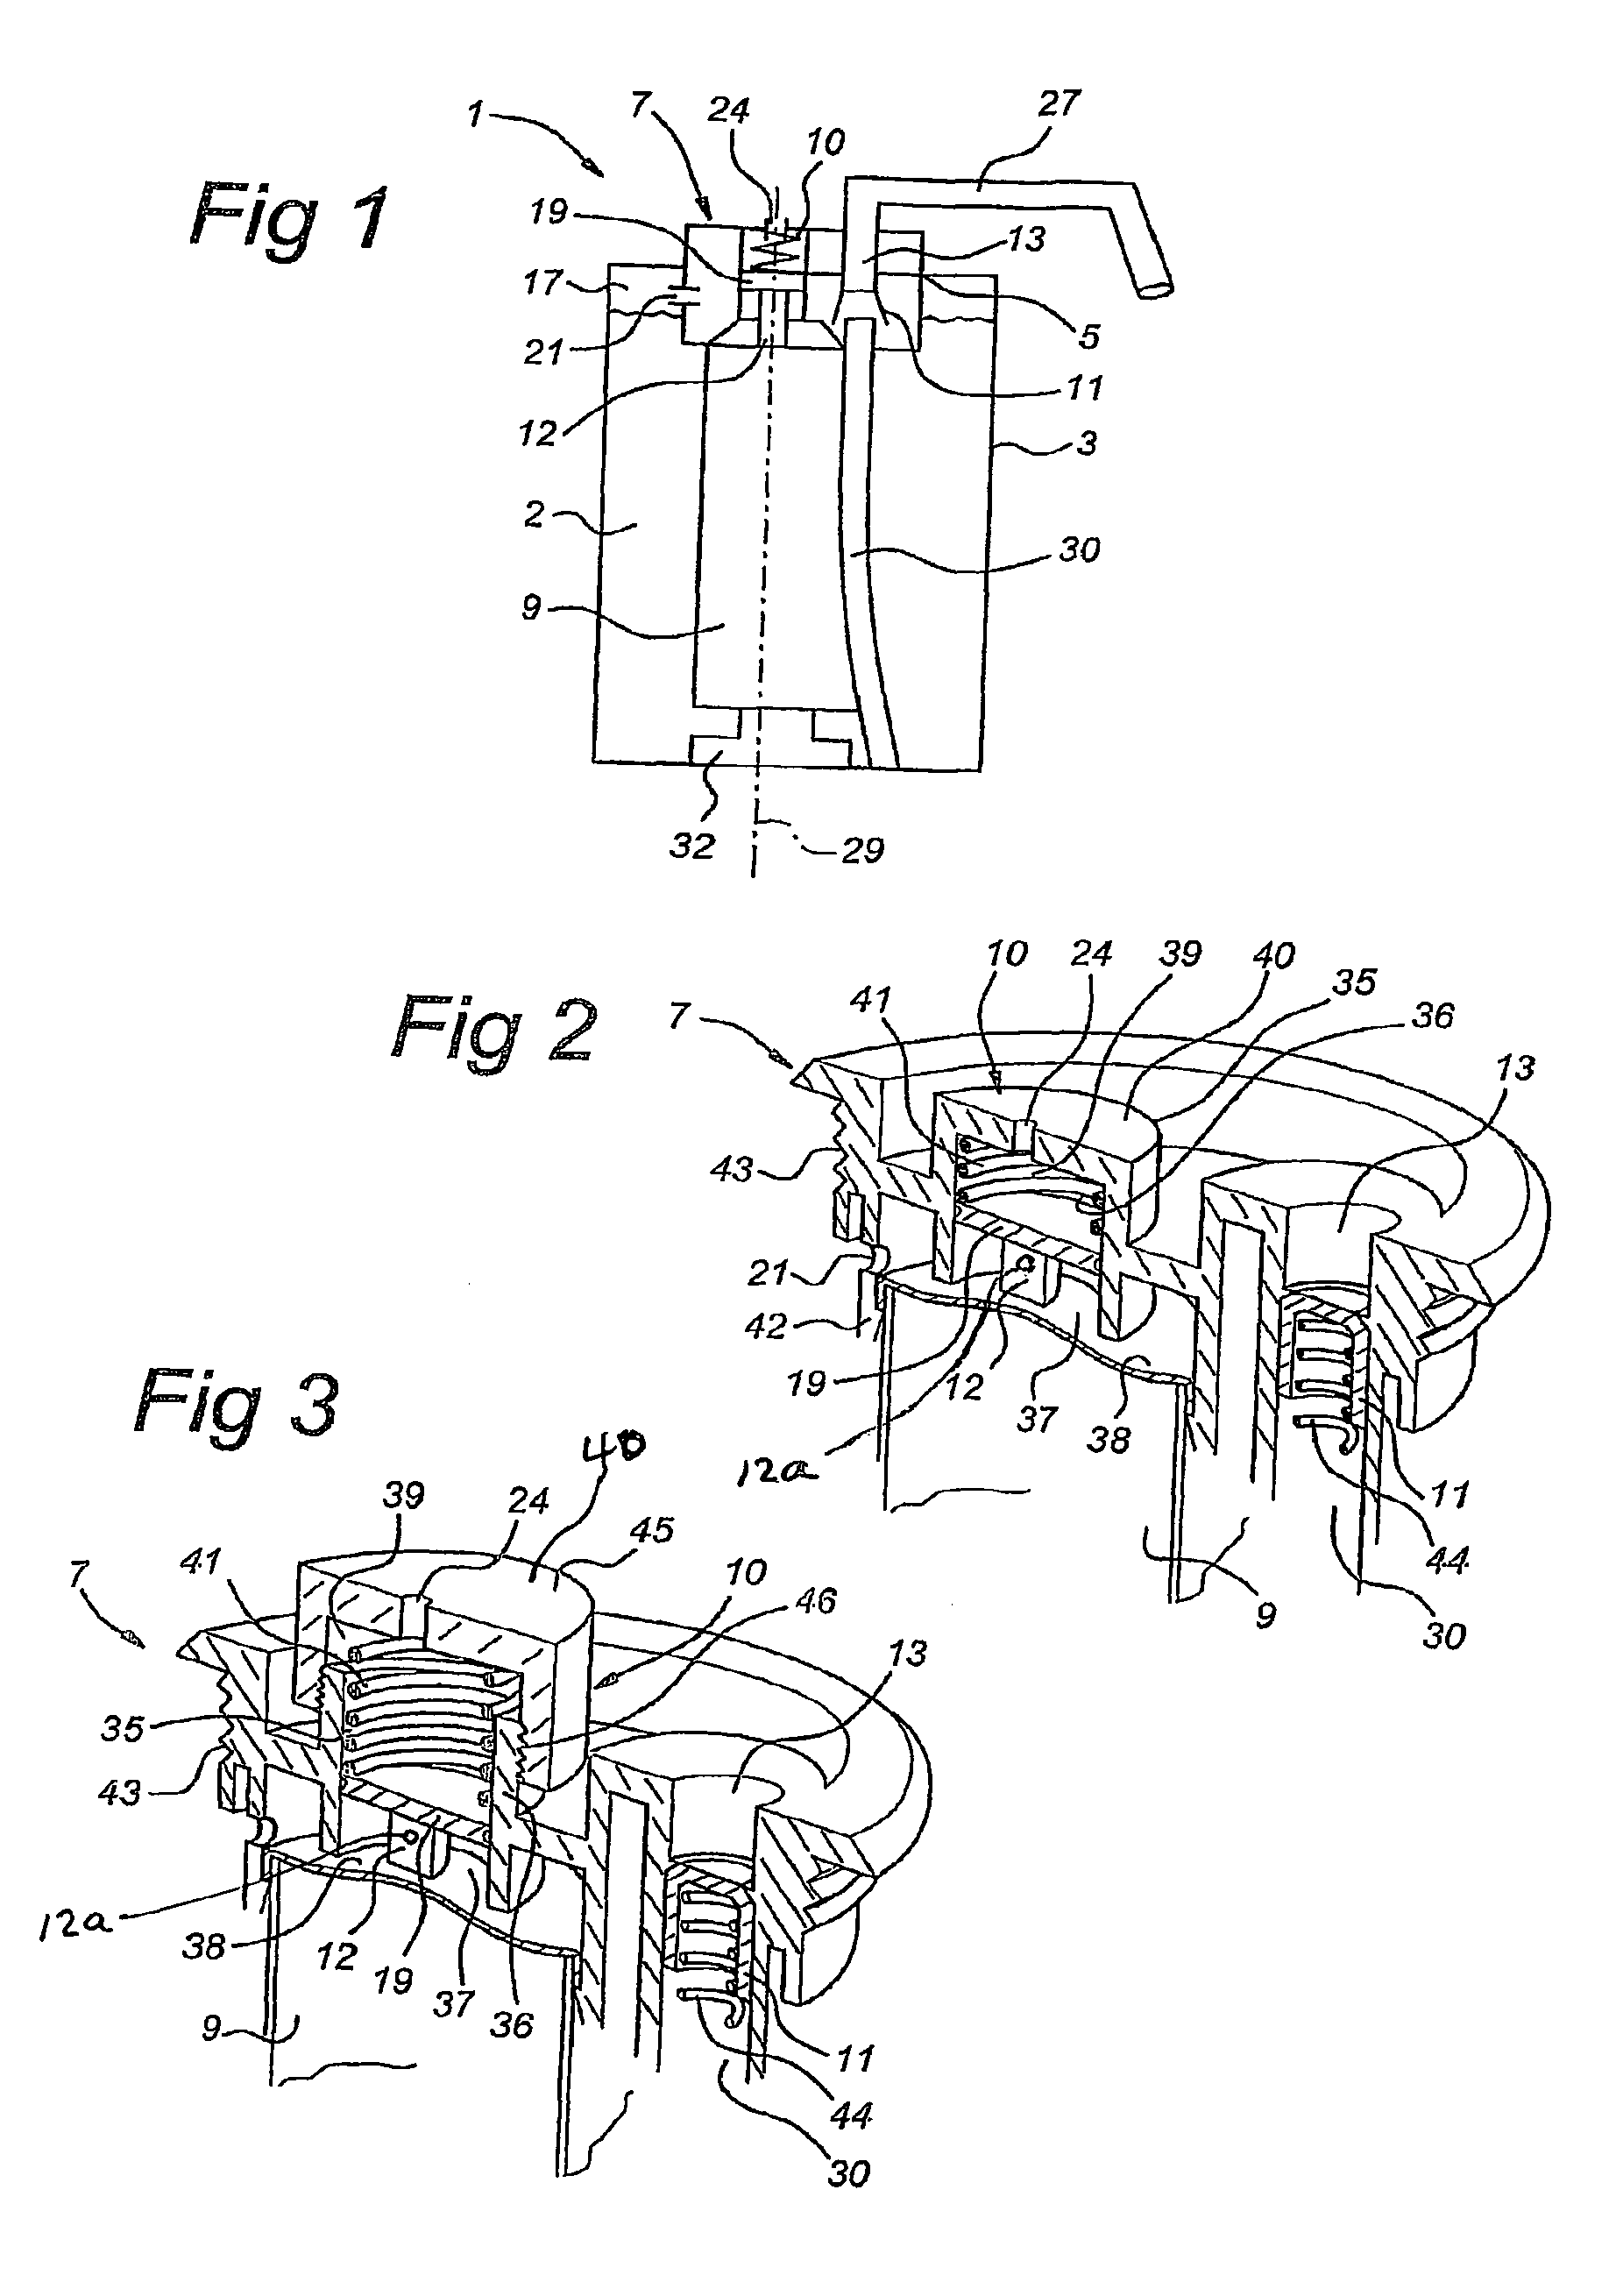 Pressure regulating container for carbonated drink